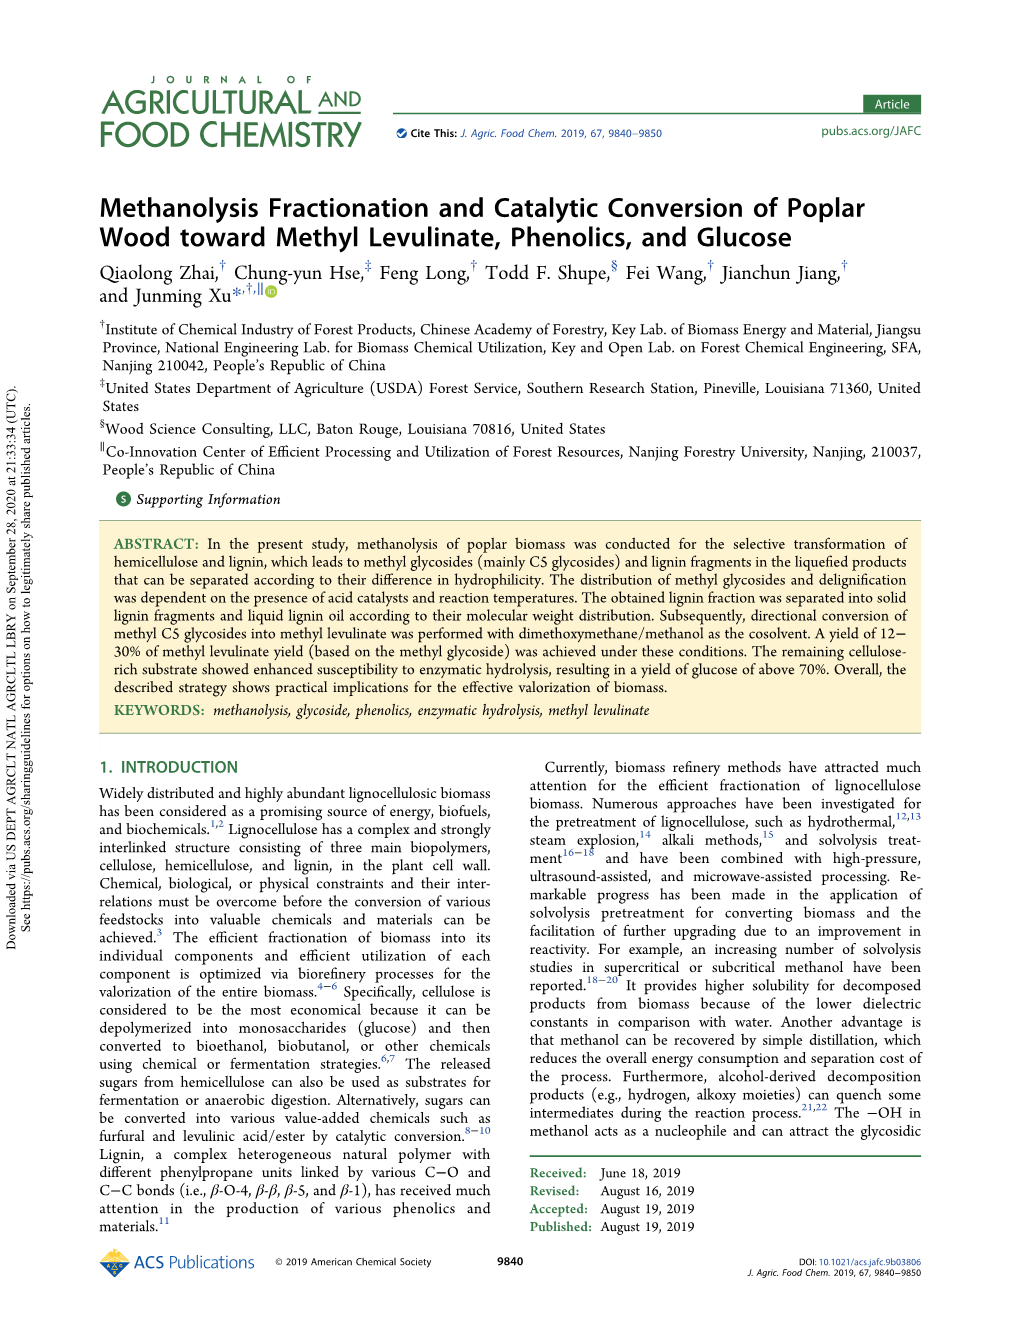 Methanolysis Fractionation and Catalytic Conversion of Poplar